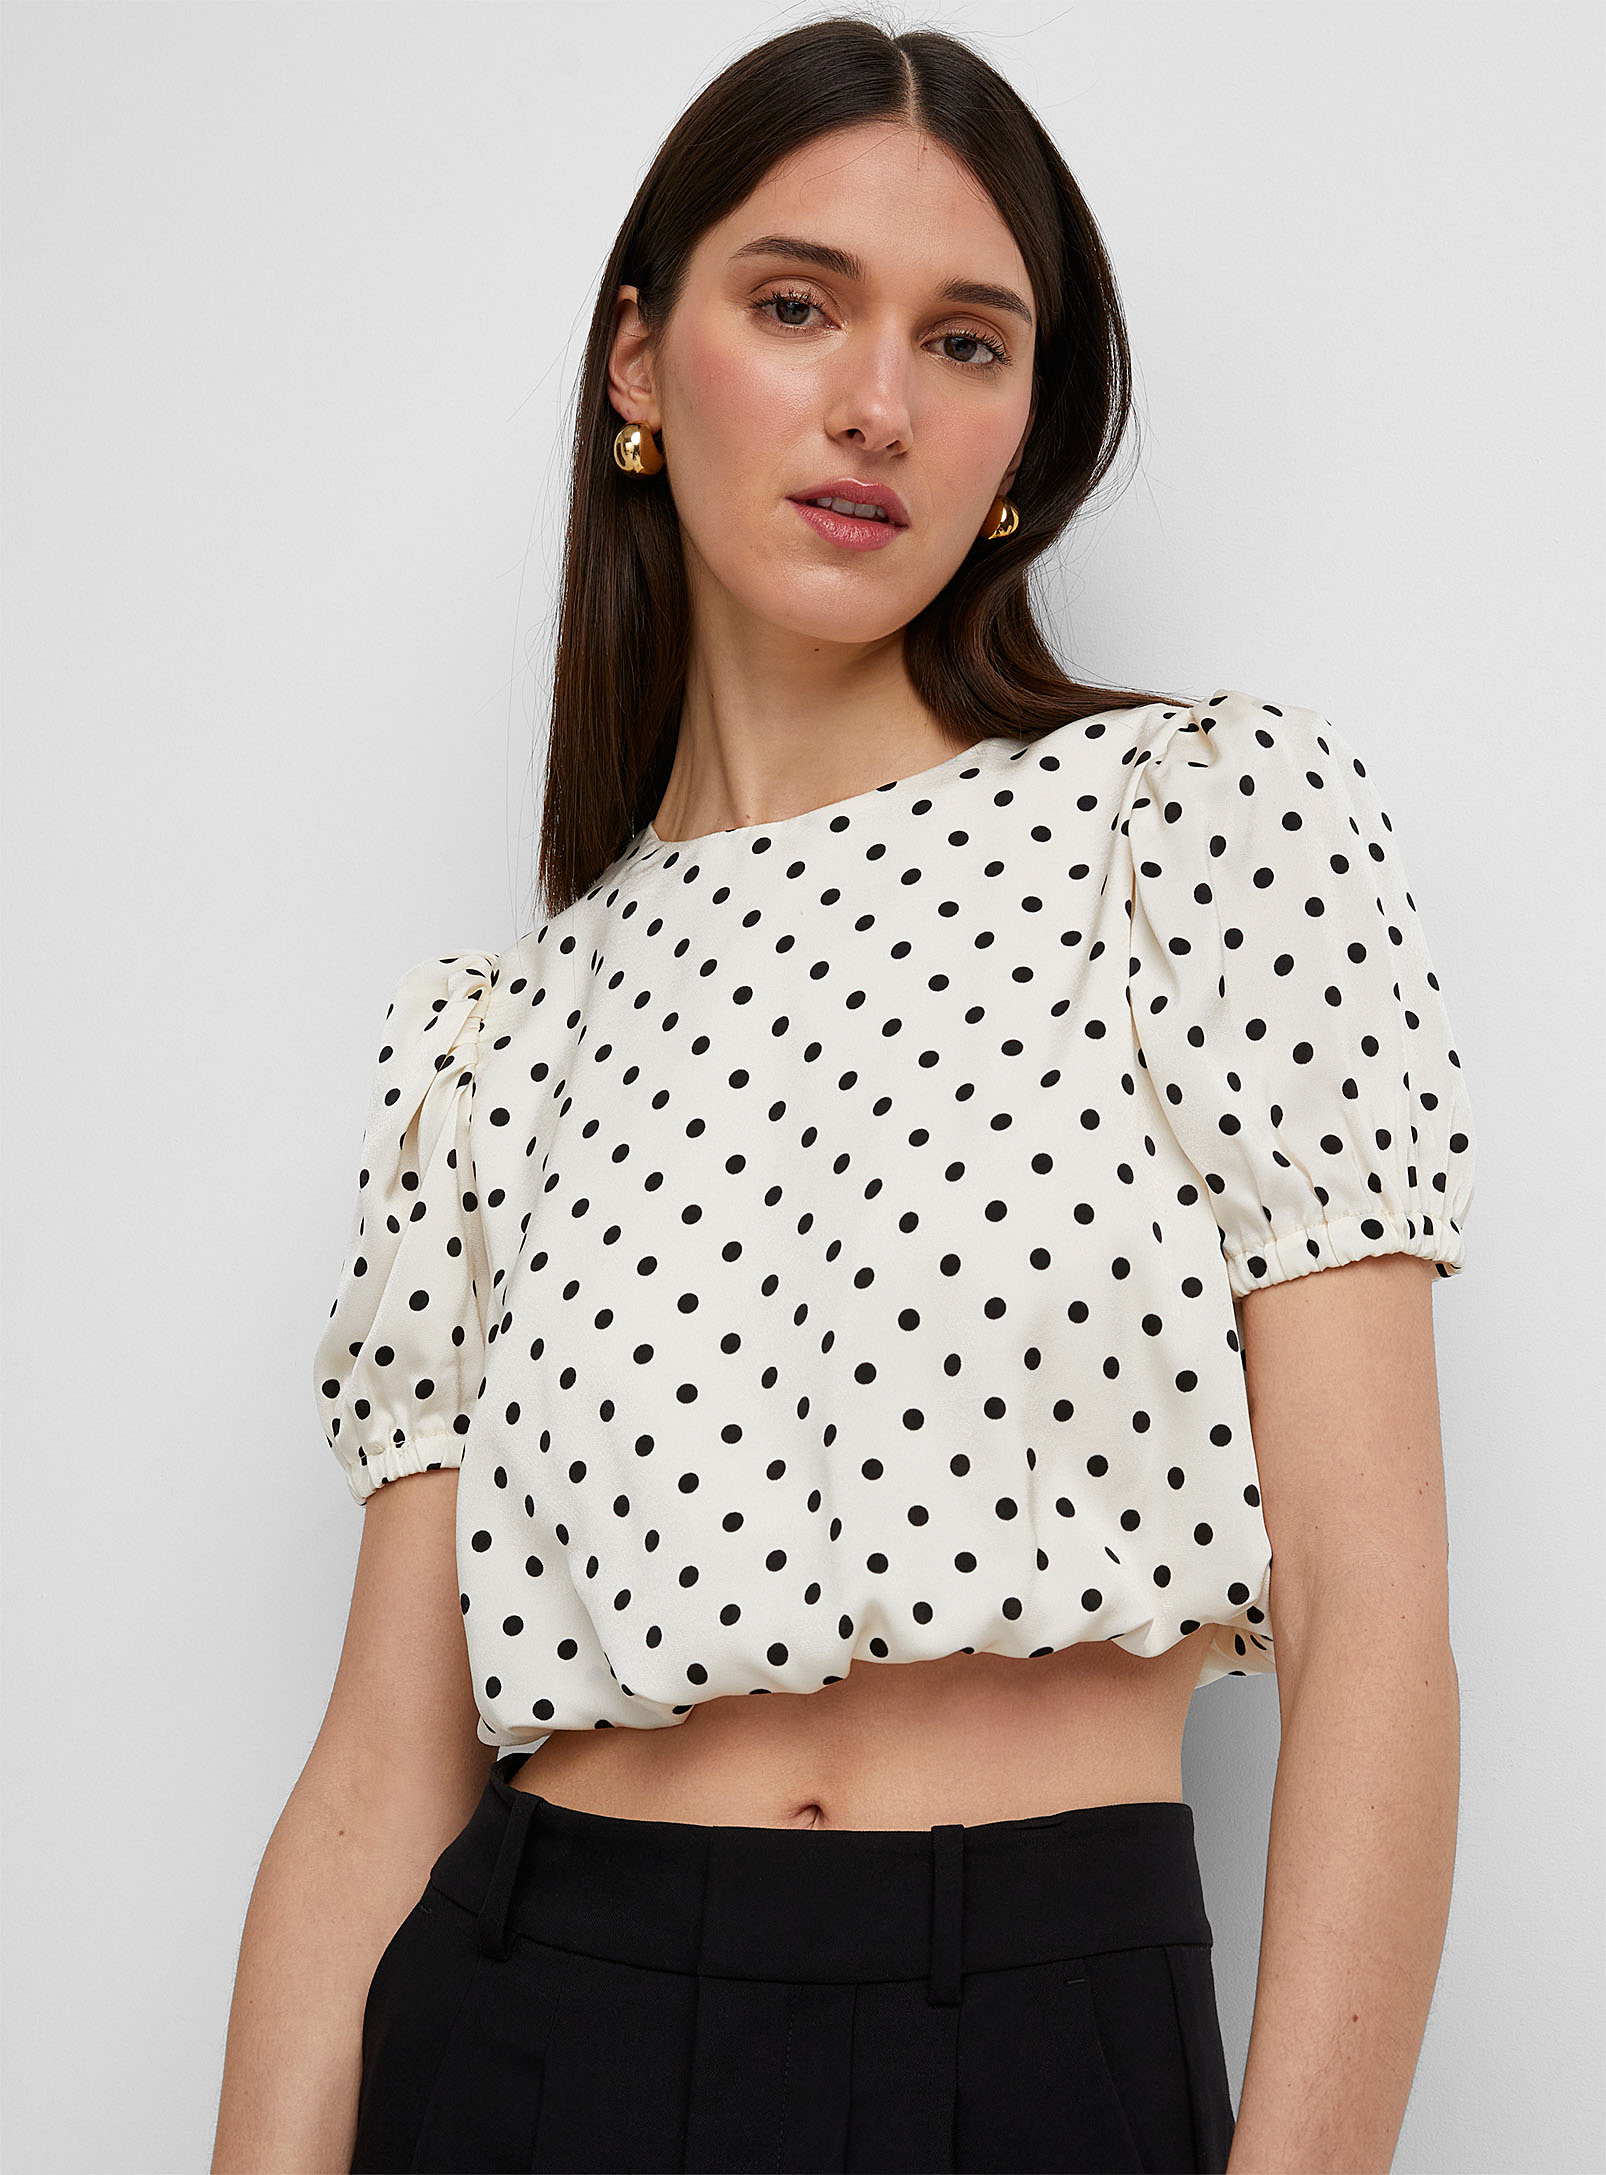 Icone Polka Dot Satin Puffy Blouse In Black And White